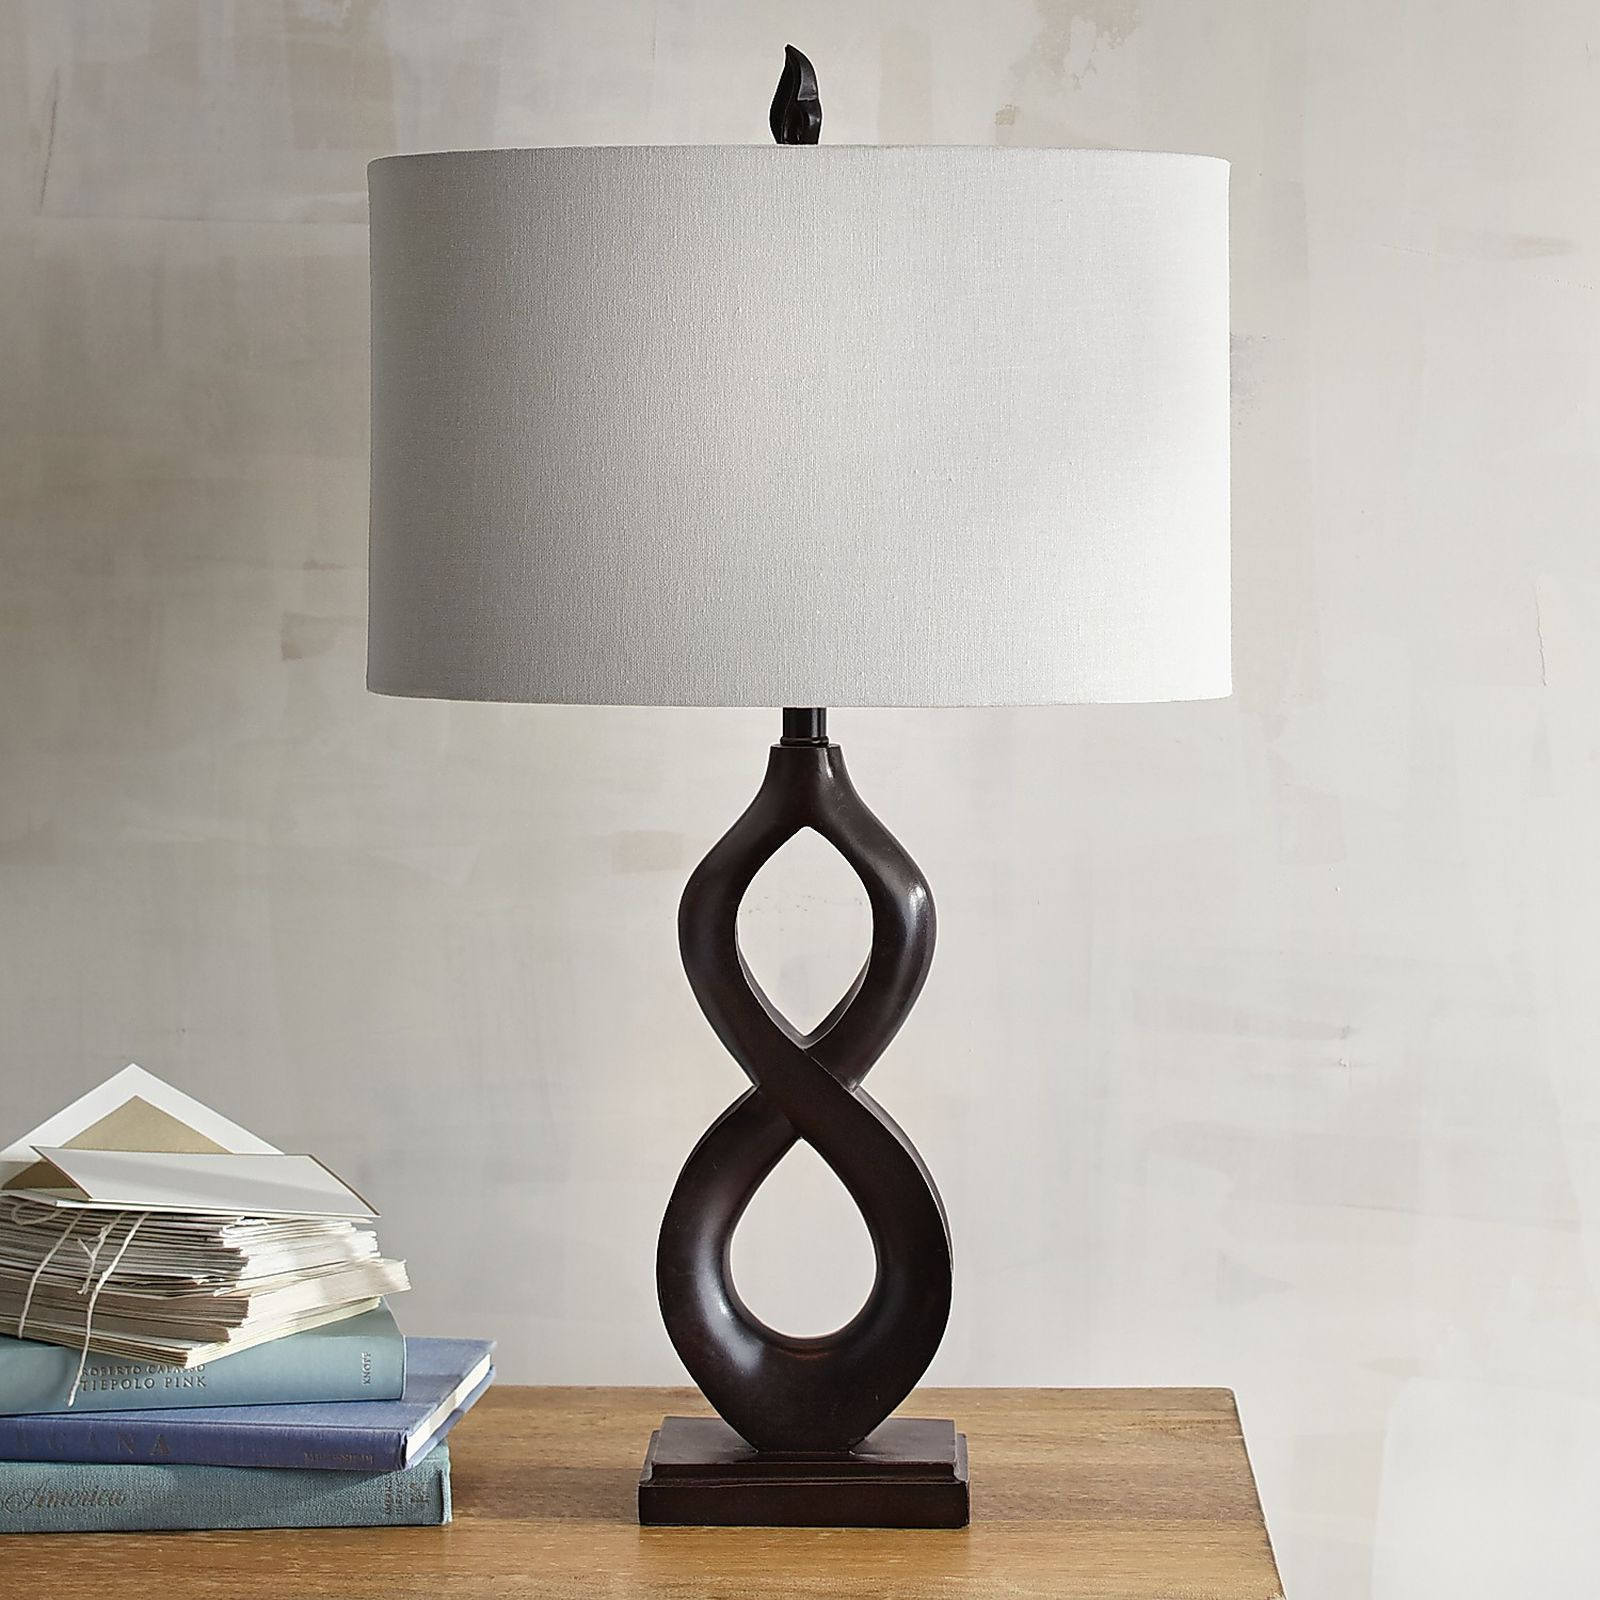 Iron Floor Lamp Awesome Infinity Lamp At Pier 1 Mizzou Office in sizing 1600 X 1600